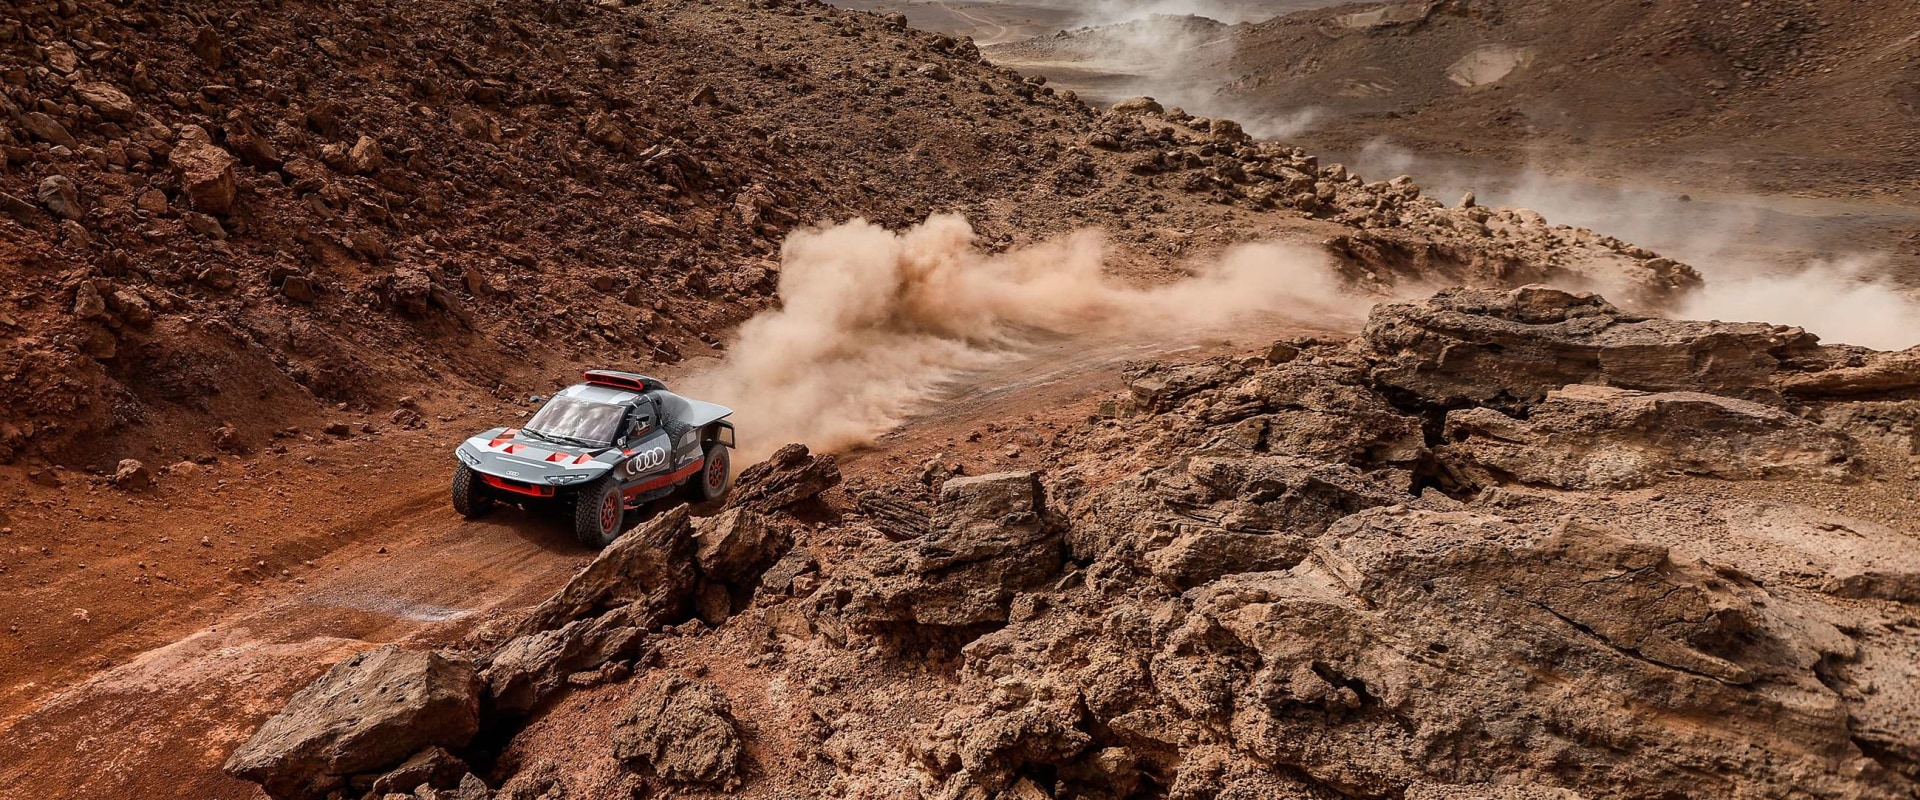 A Comprehensive Overview of Rally Raid